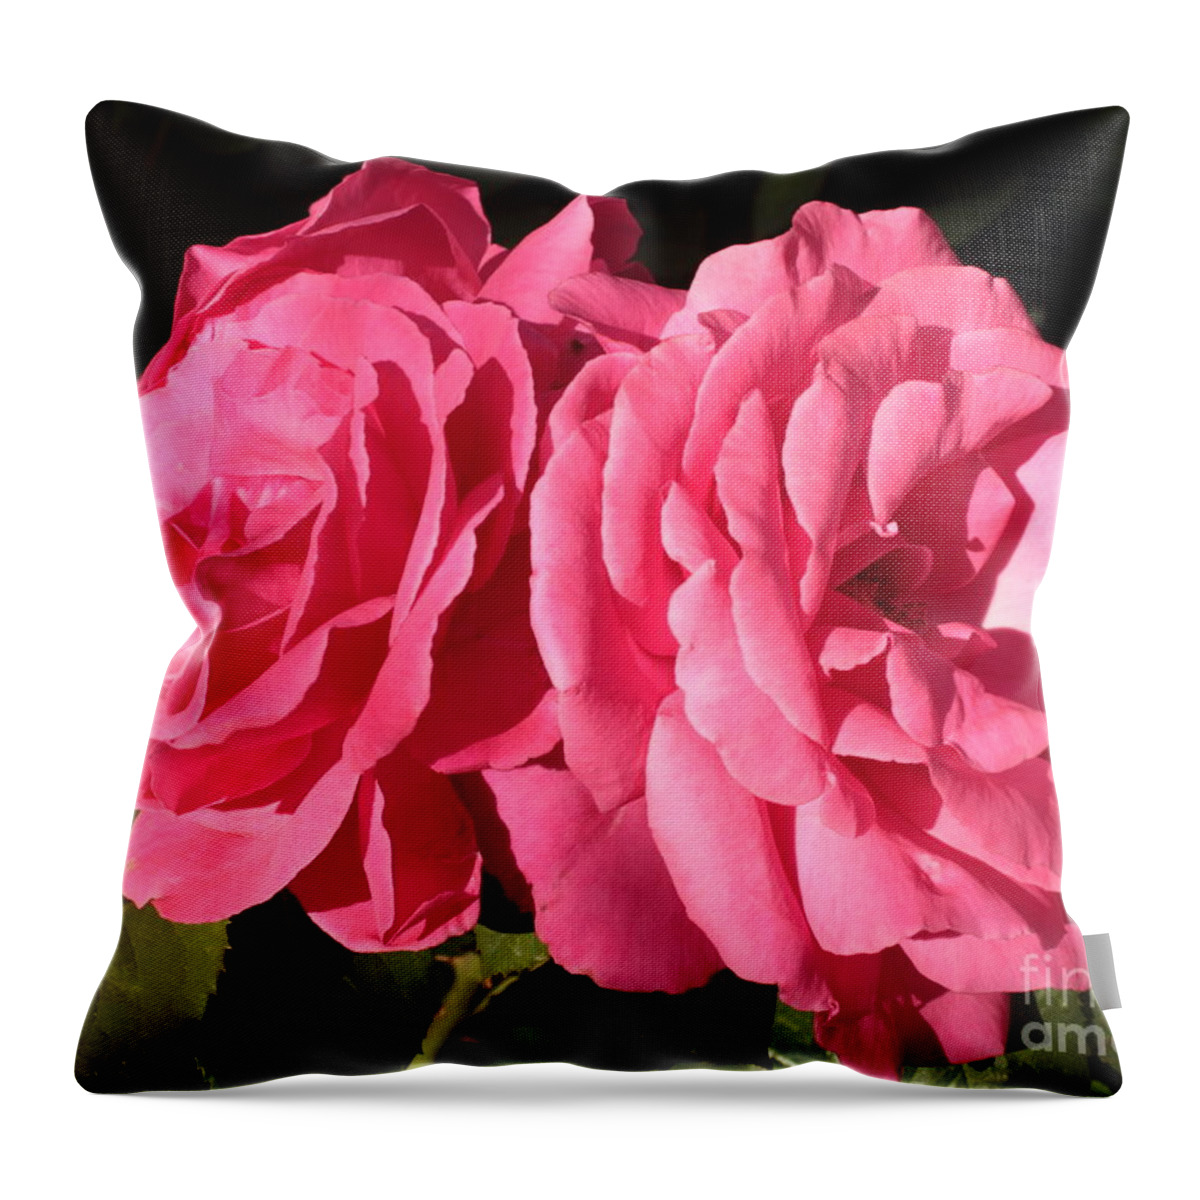 Large Pink Roses Throw Pillow featuring the photograph Large Pink Roses by Carol Groenen